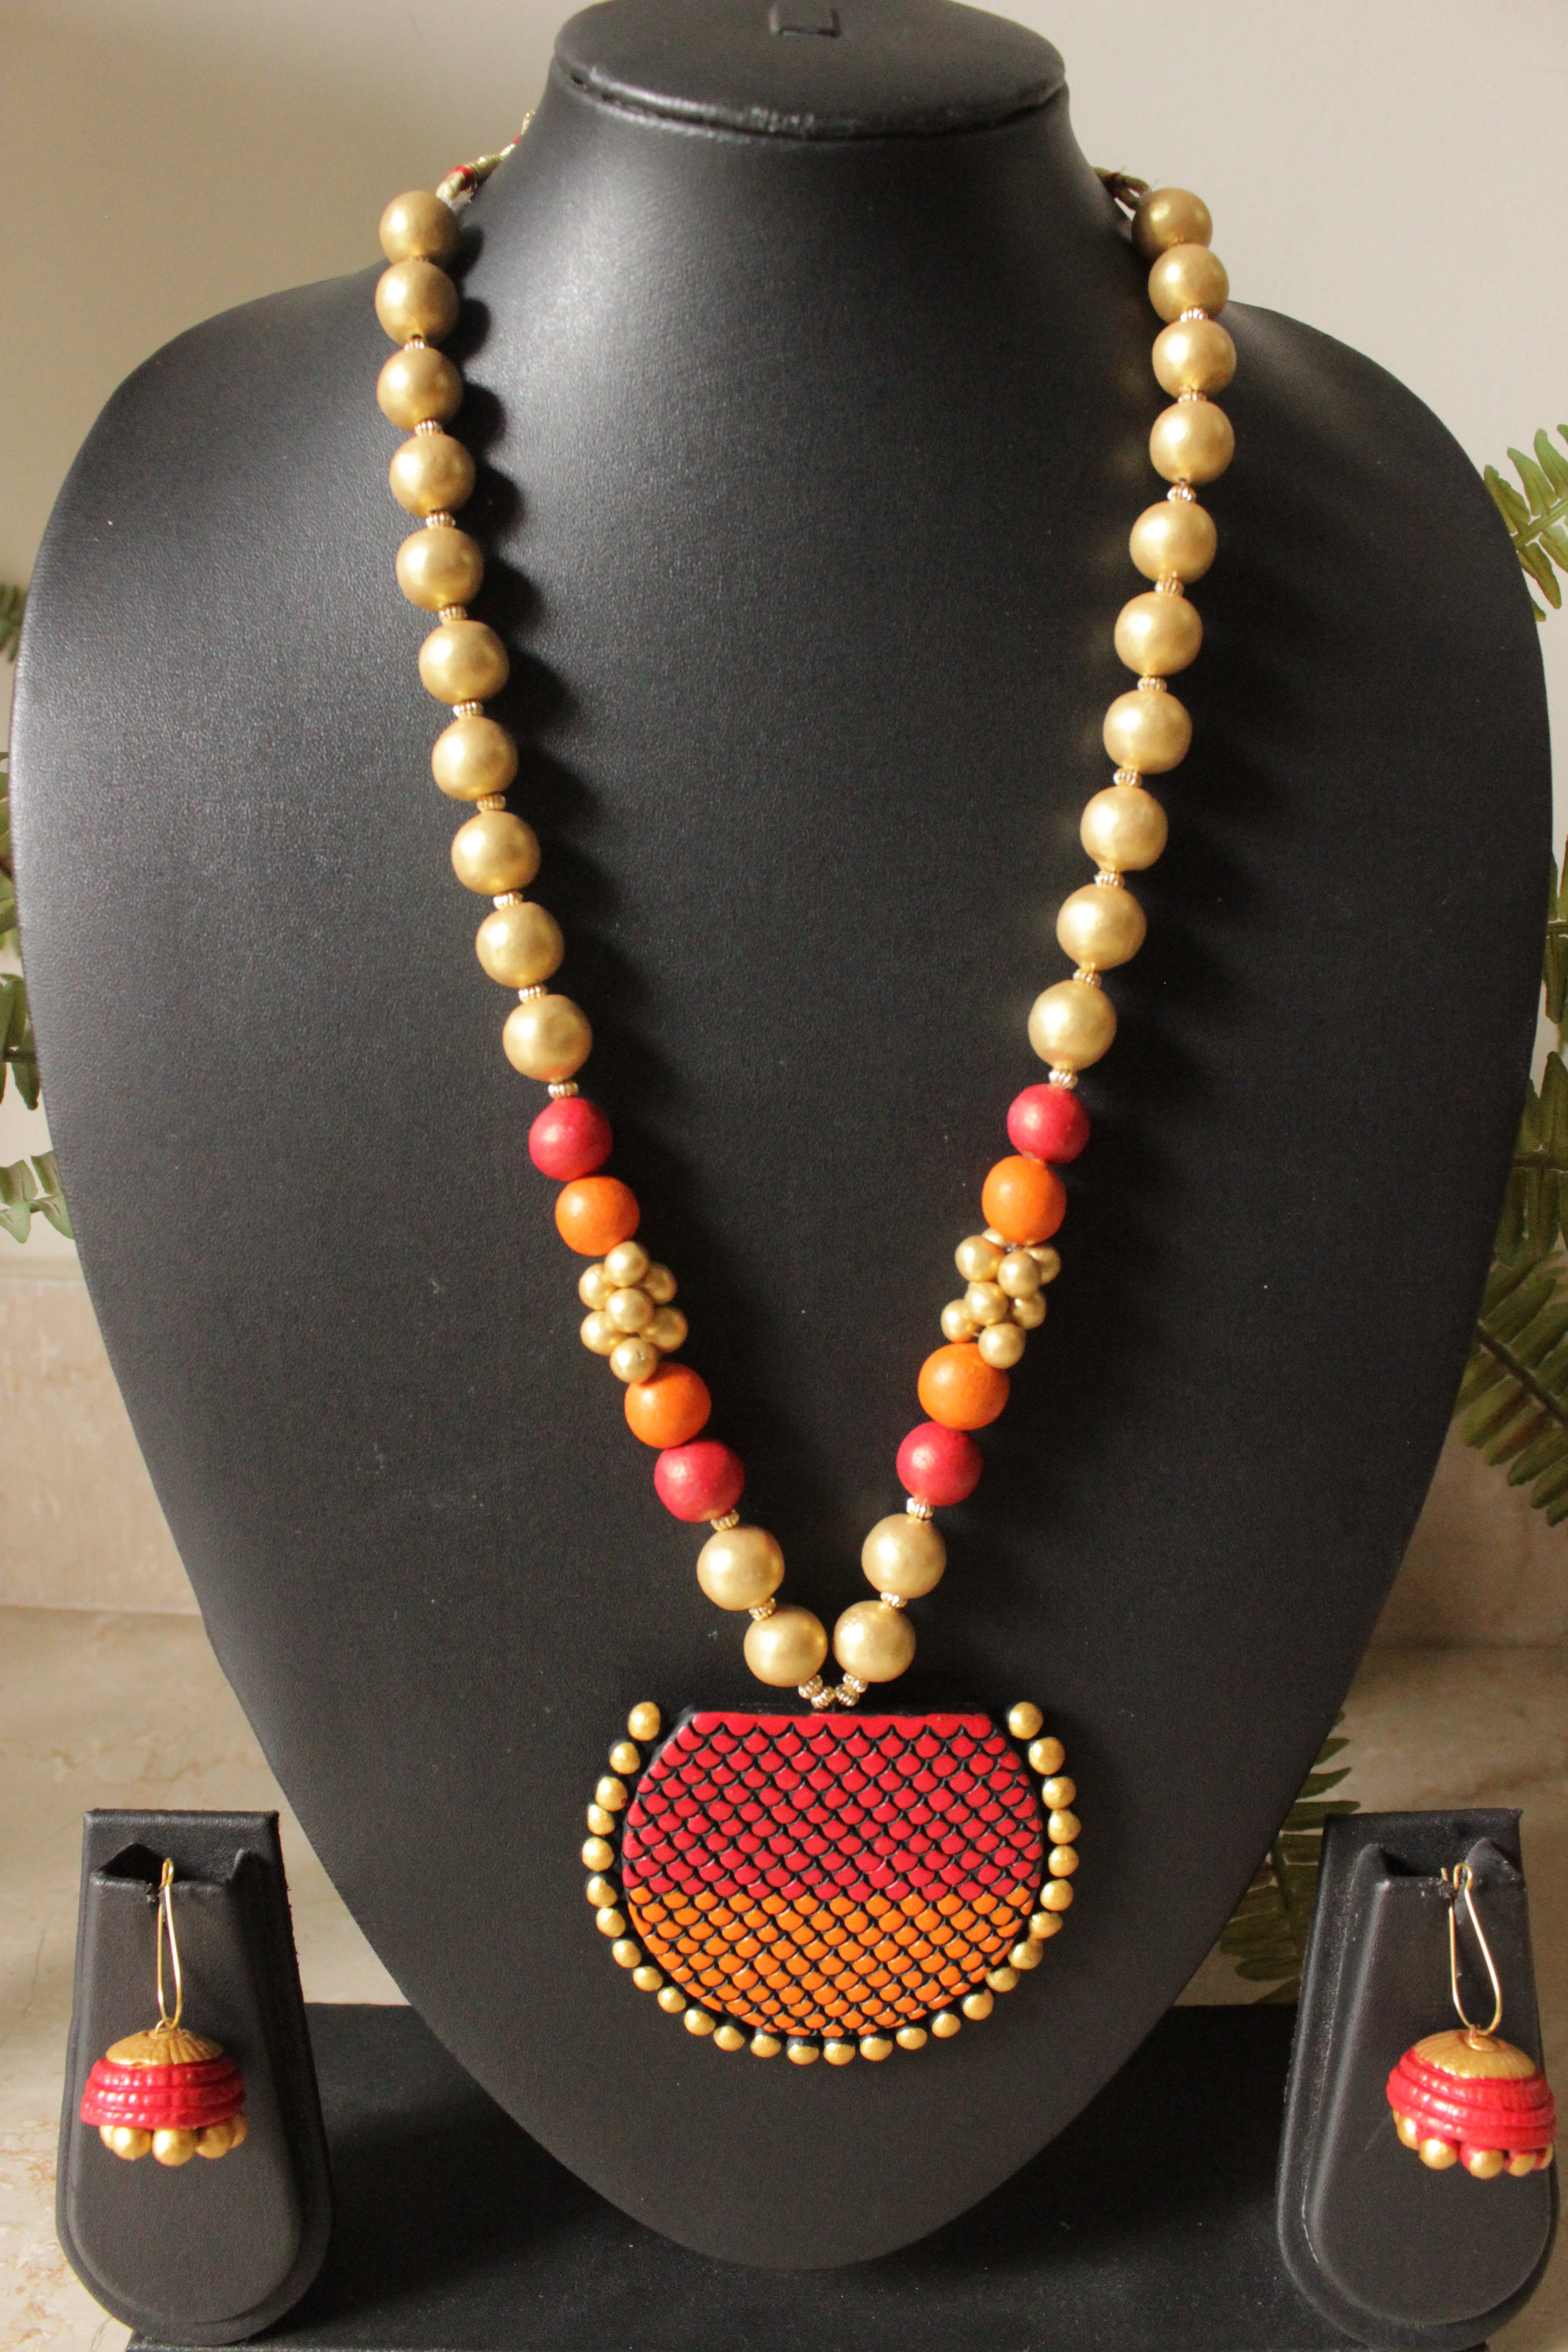 Earthy Gold Toned Handcrafted Terracotta Clay Necklace Set with Jhumka Earrings